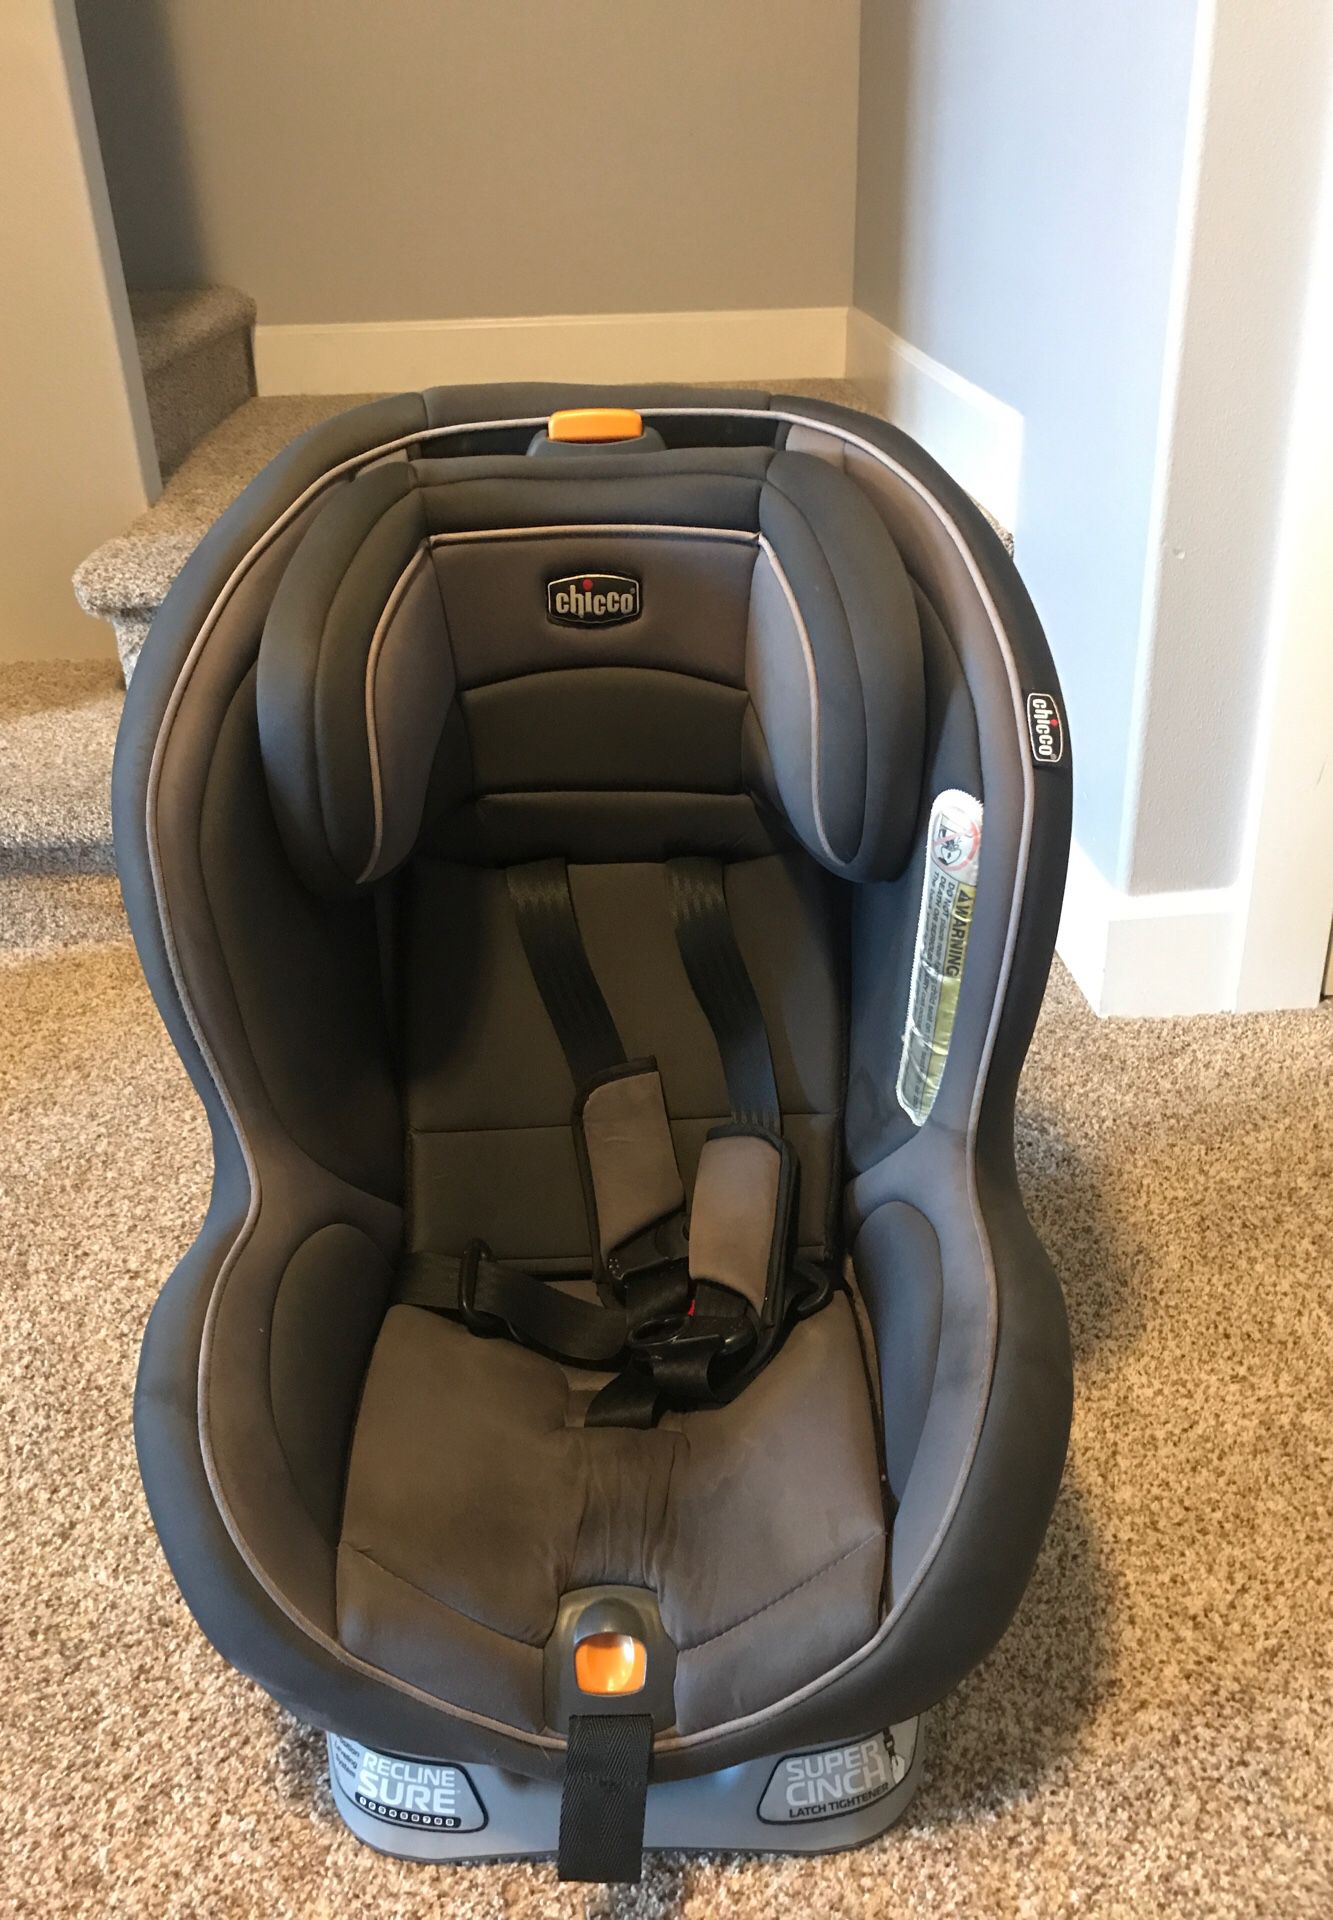 Chicco Nextfit convertable car seat